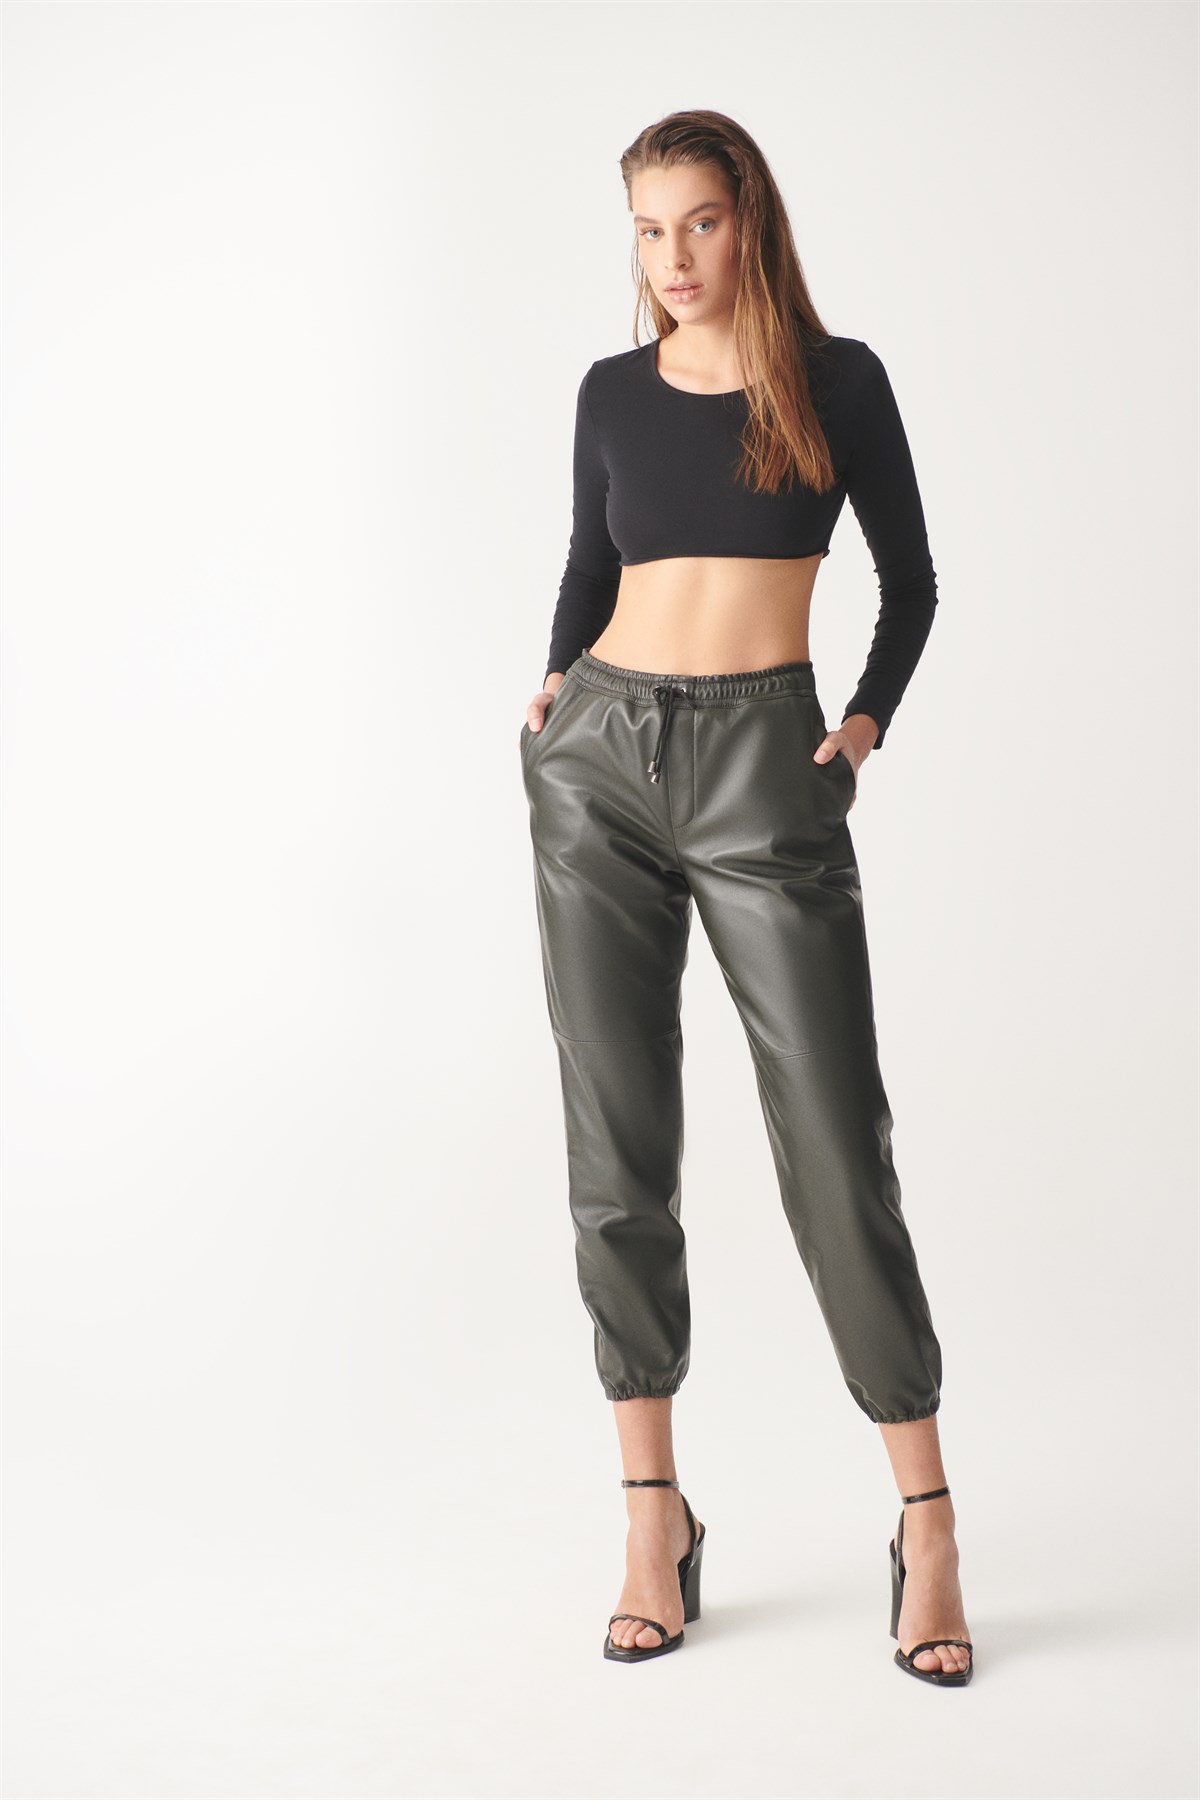 Green Sport Leather Pants | Women's Leather Pants